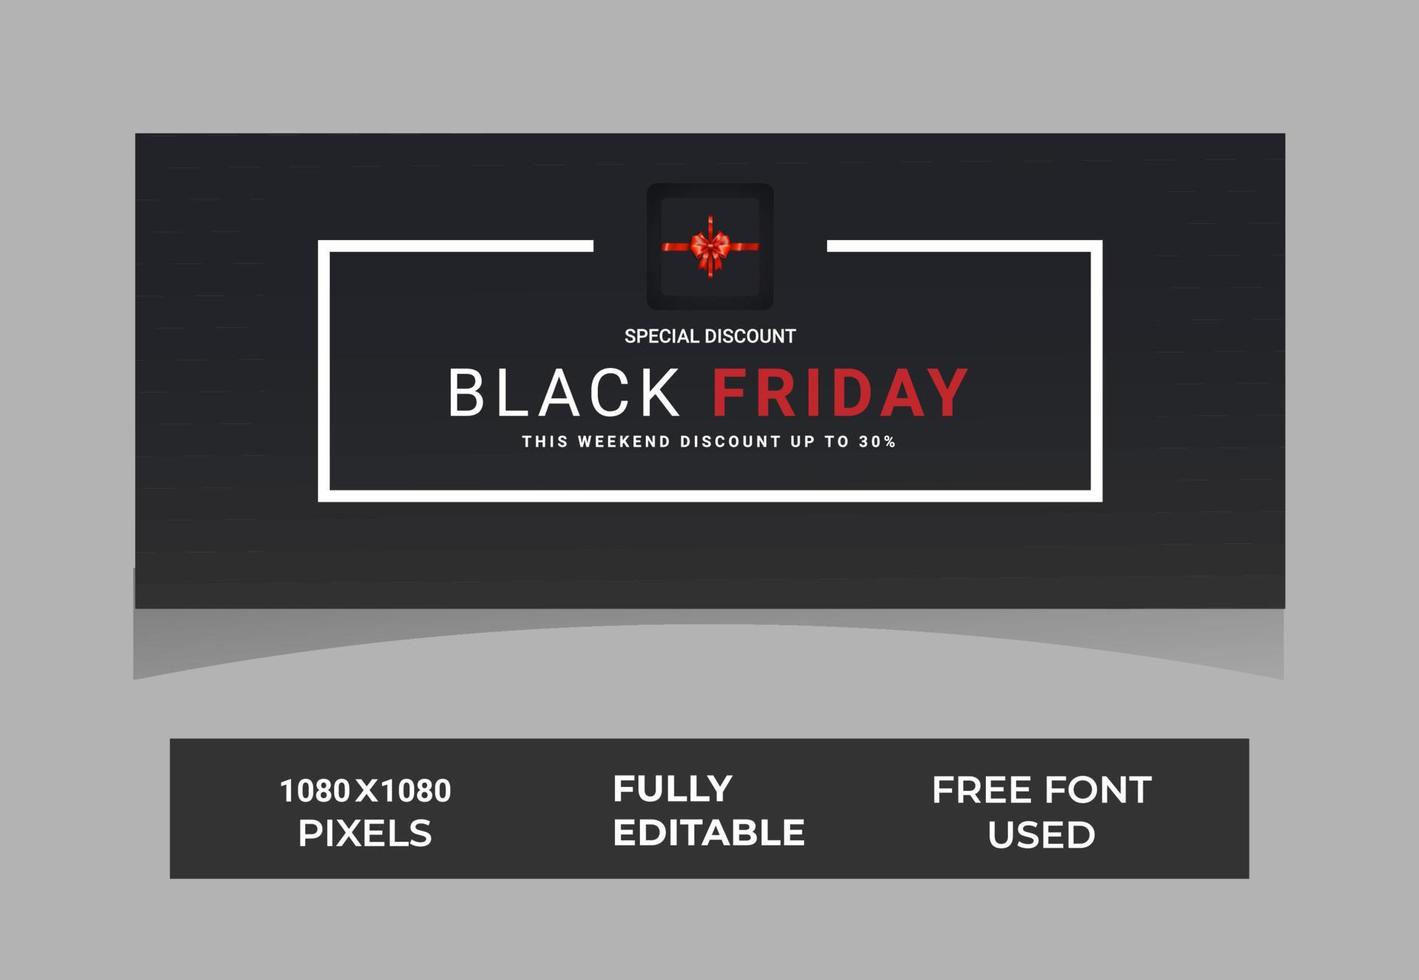 Black Friday banner. Gift box with red bow on dark background. Black Friday horizontal promotion banner in rectangle frame. Luxury background for Black Friday sale. Vector